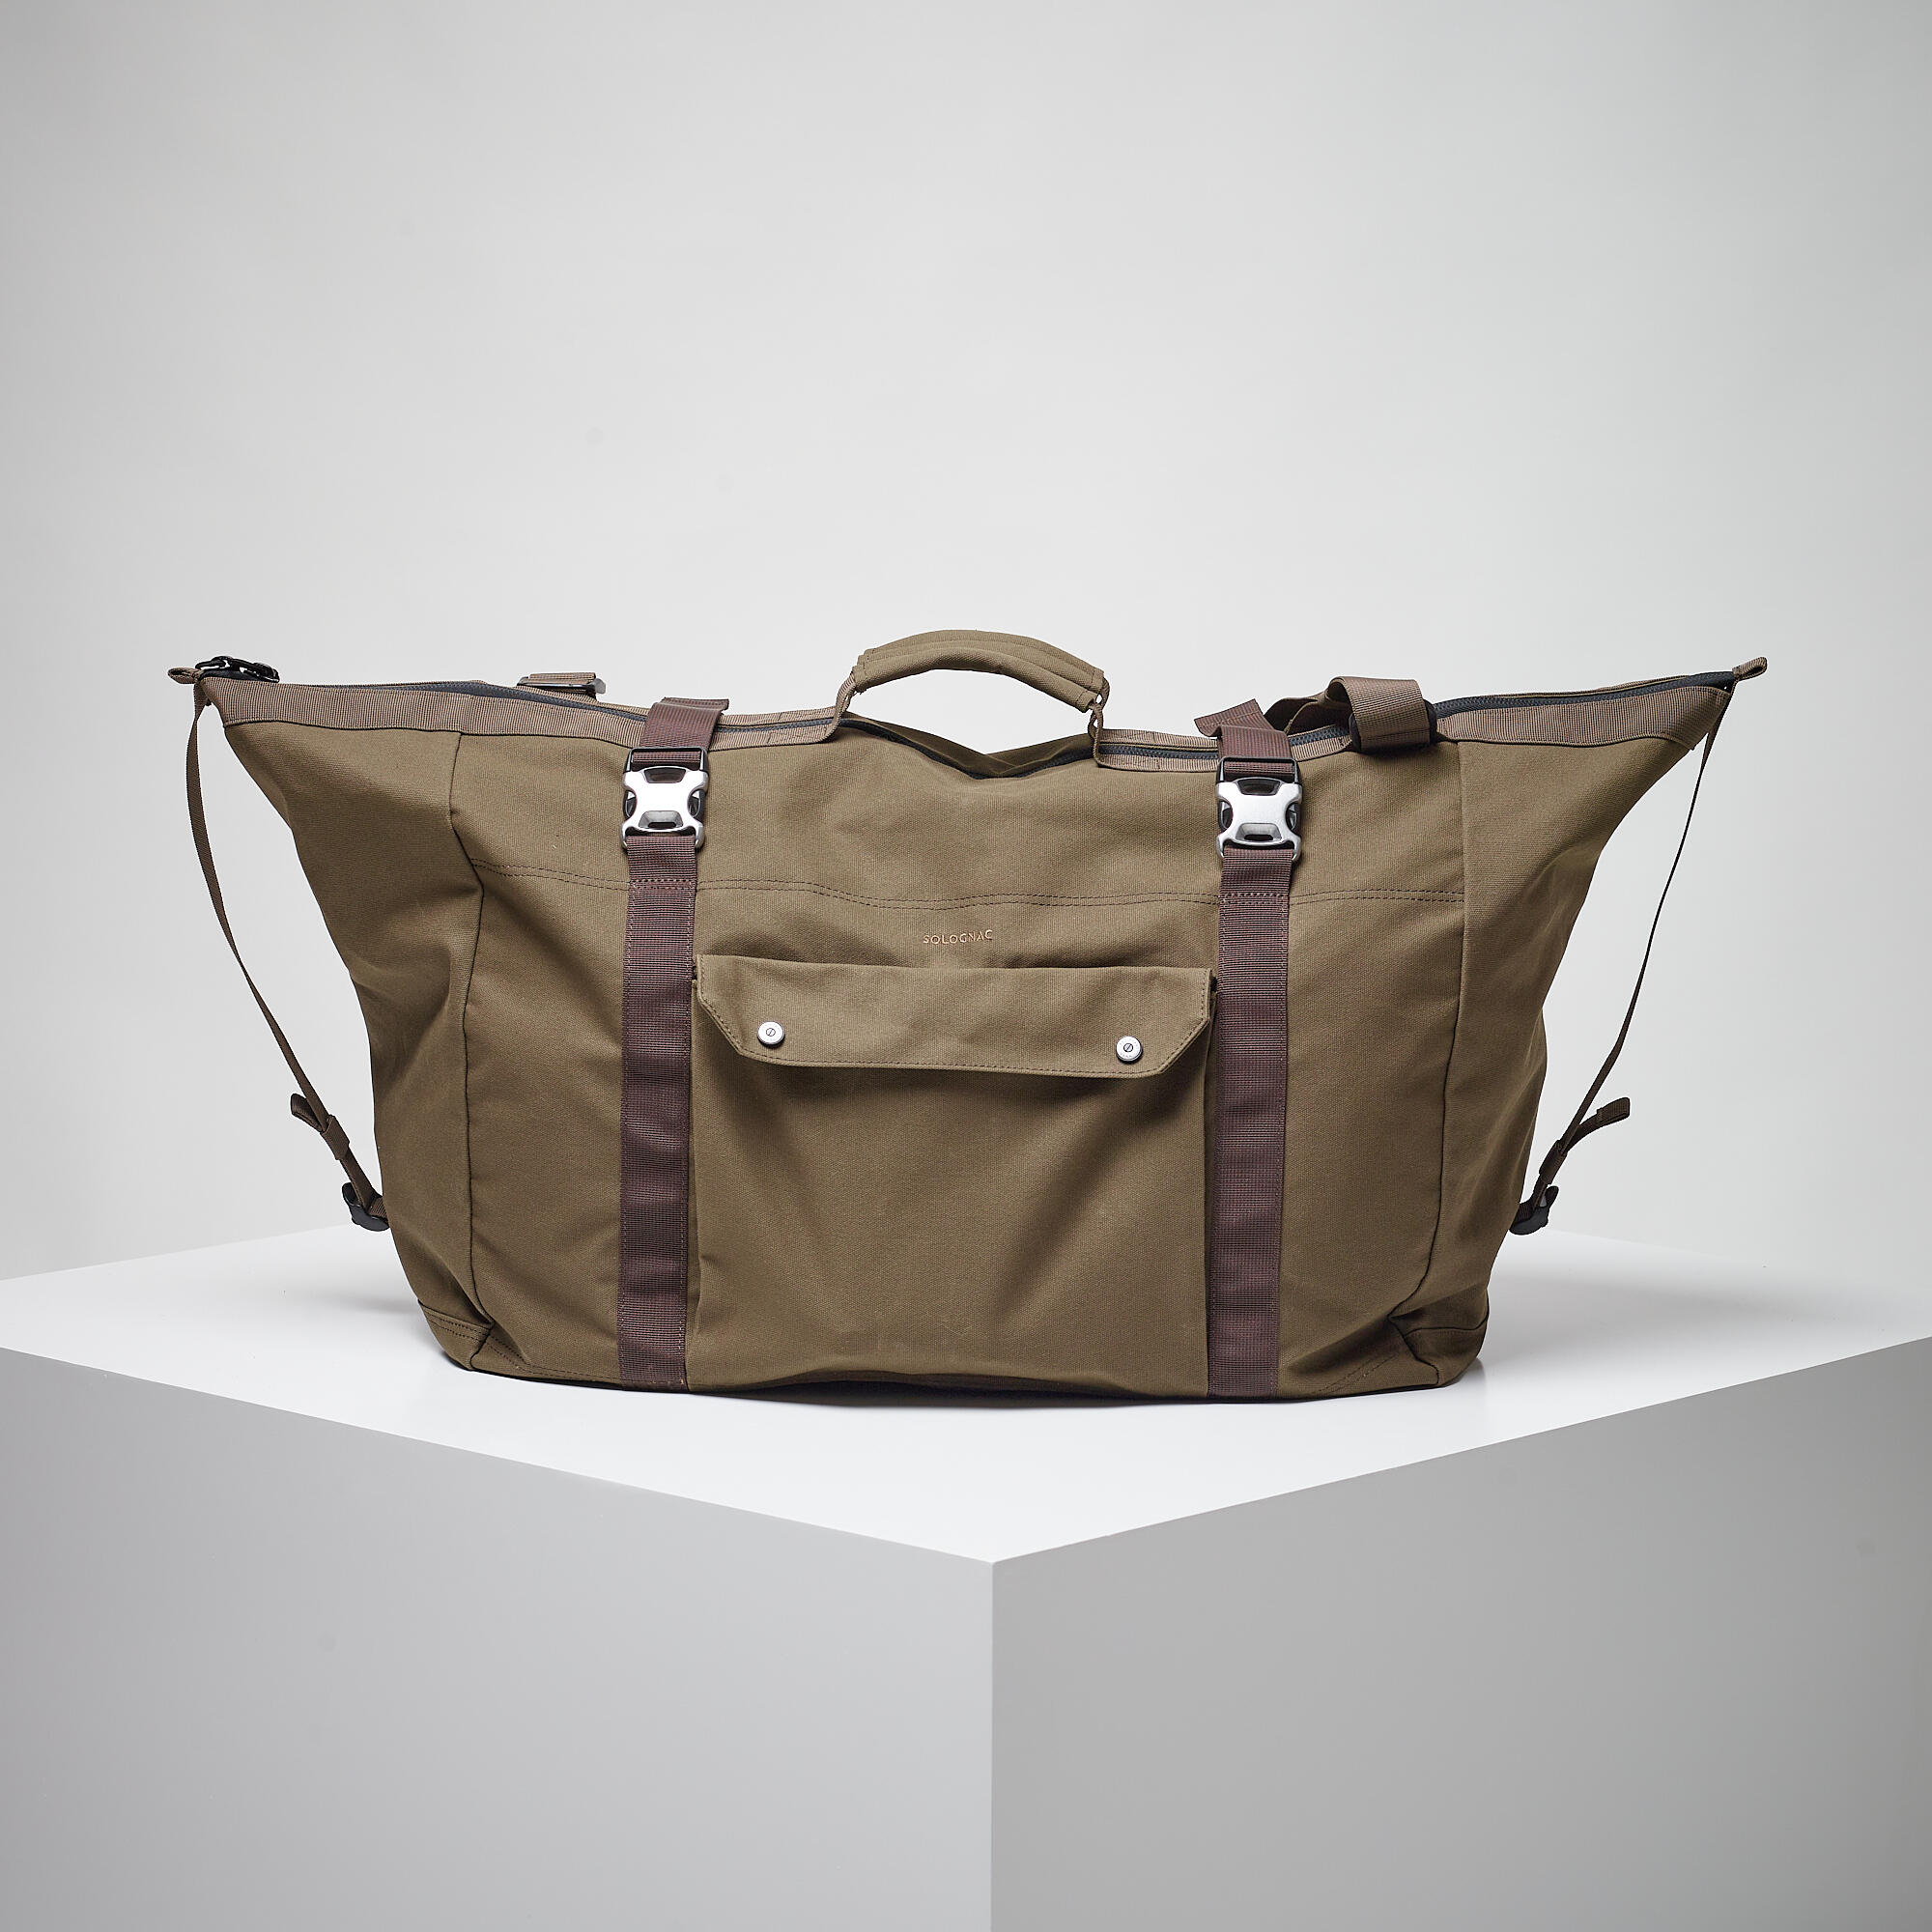 SOLOGNAC Country Sport Carry Duffle Bag 80L - Cotton Wax Brown